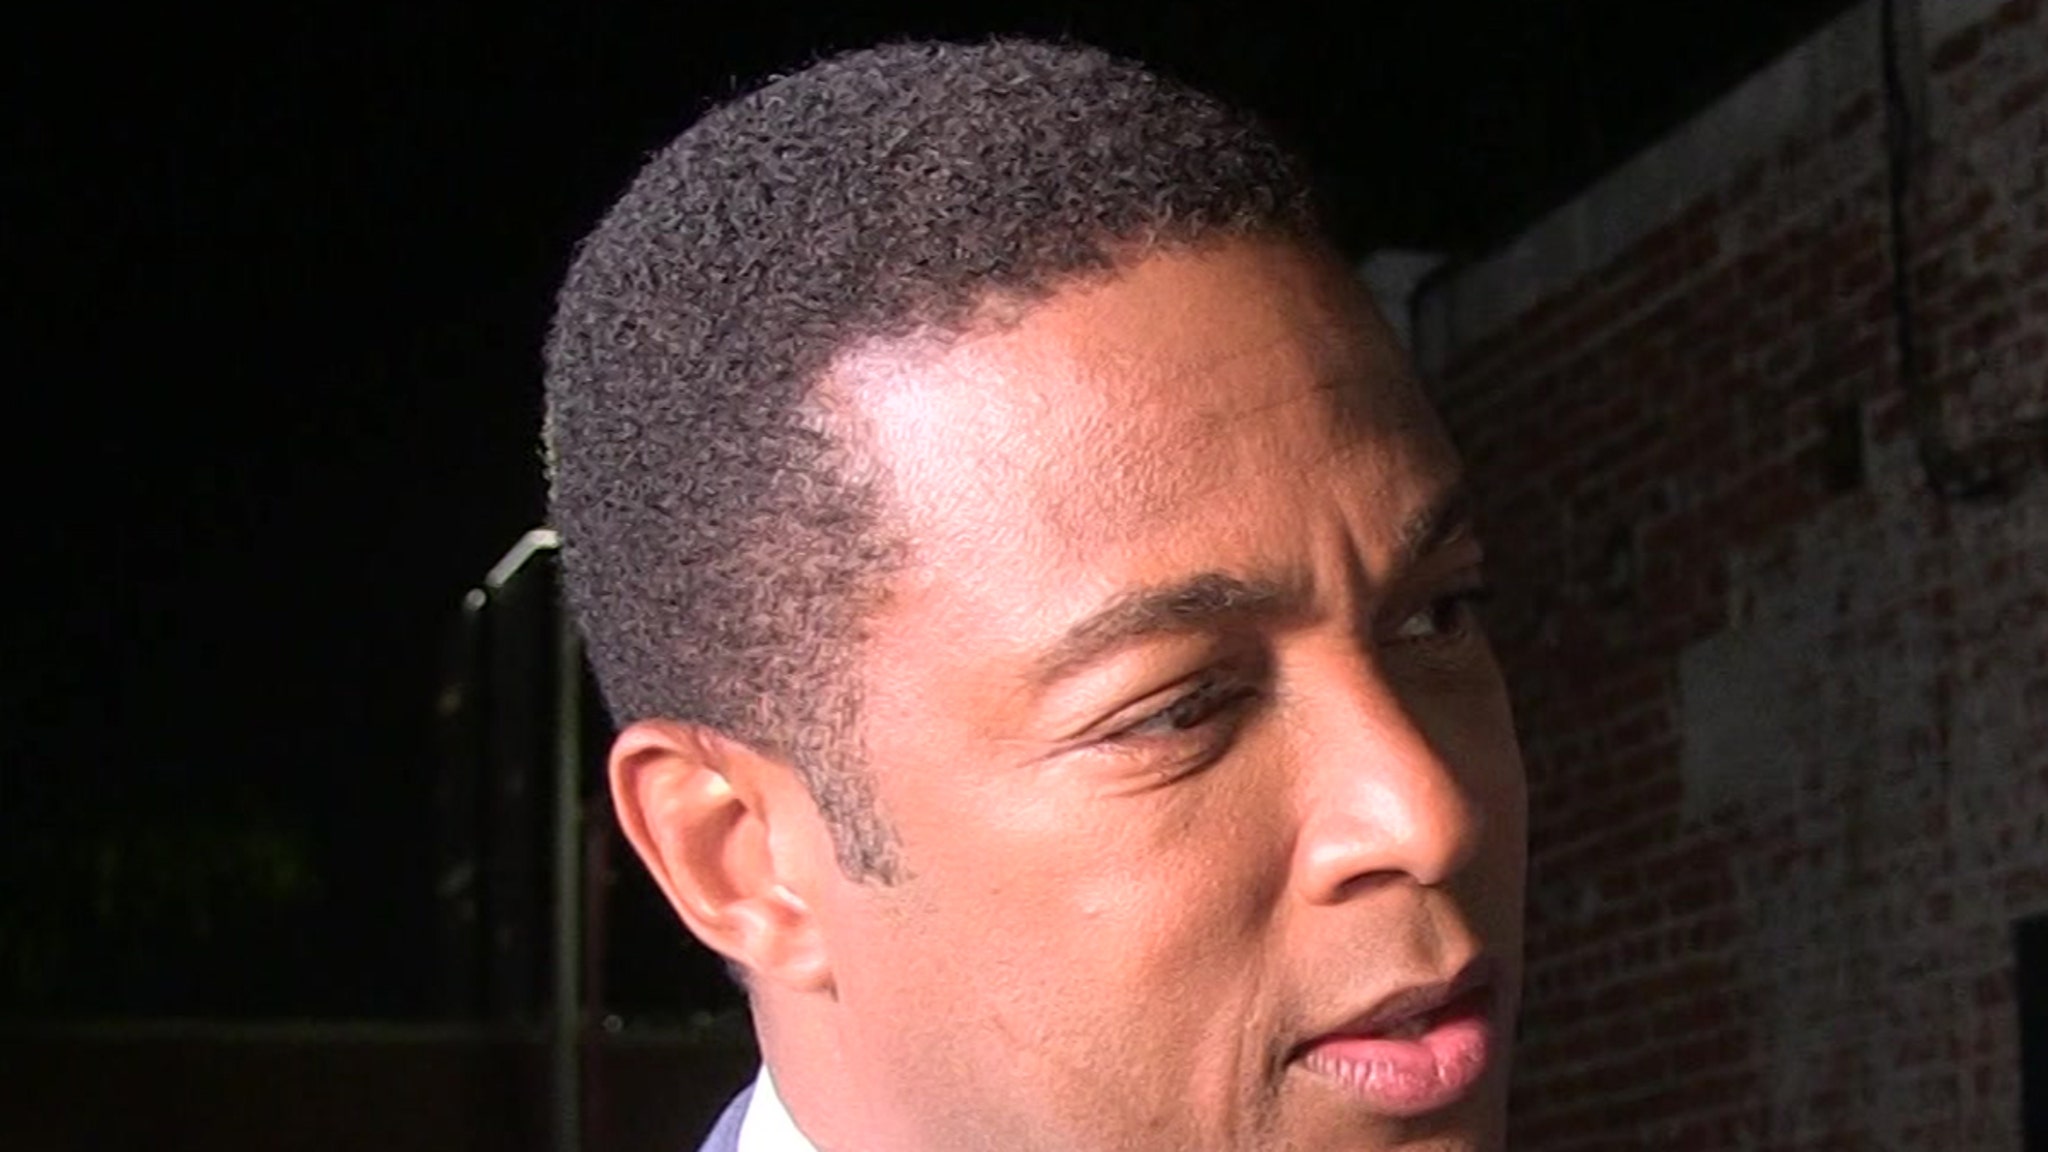 Don Lemon pulls out of NYC event amid backlash